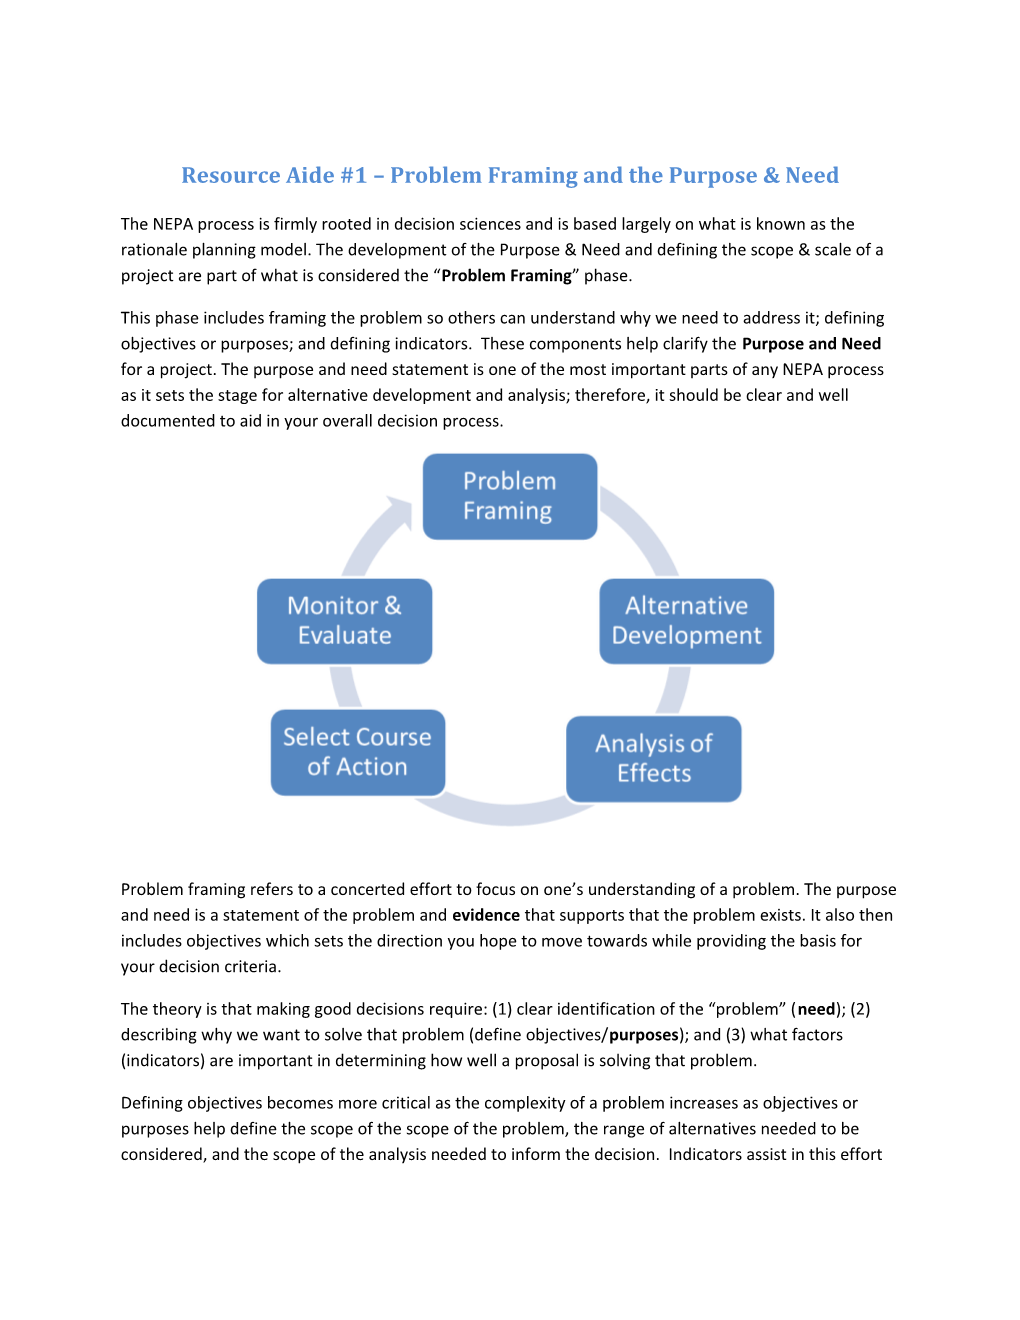 Resource Aide #1 Problemframing and the Purpose & Need